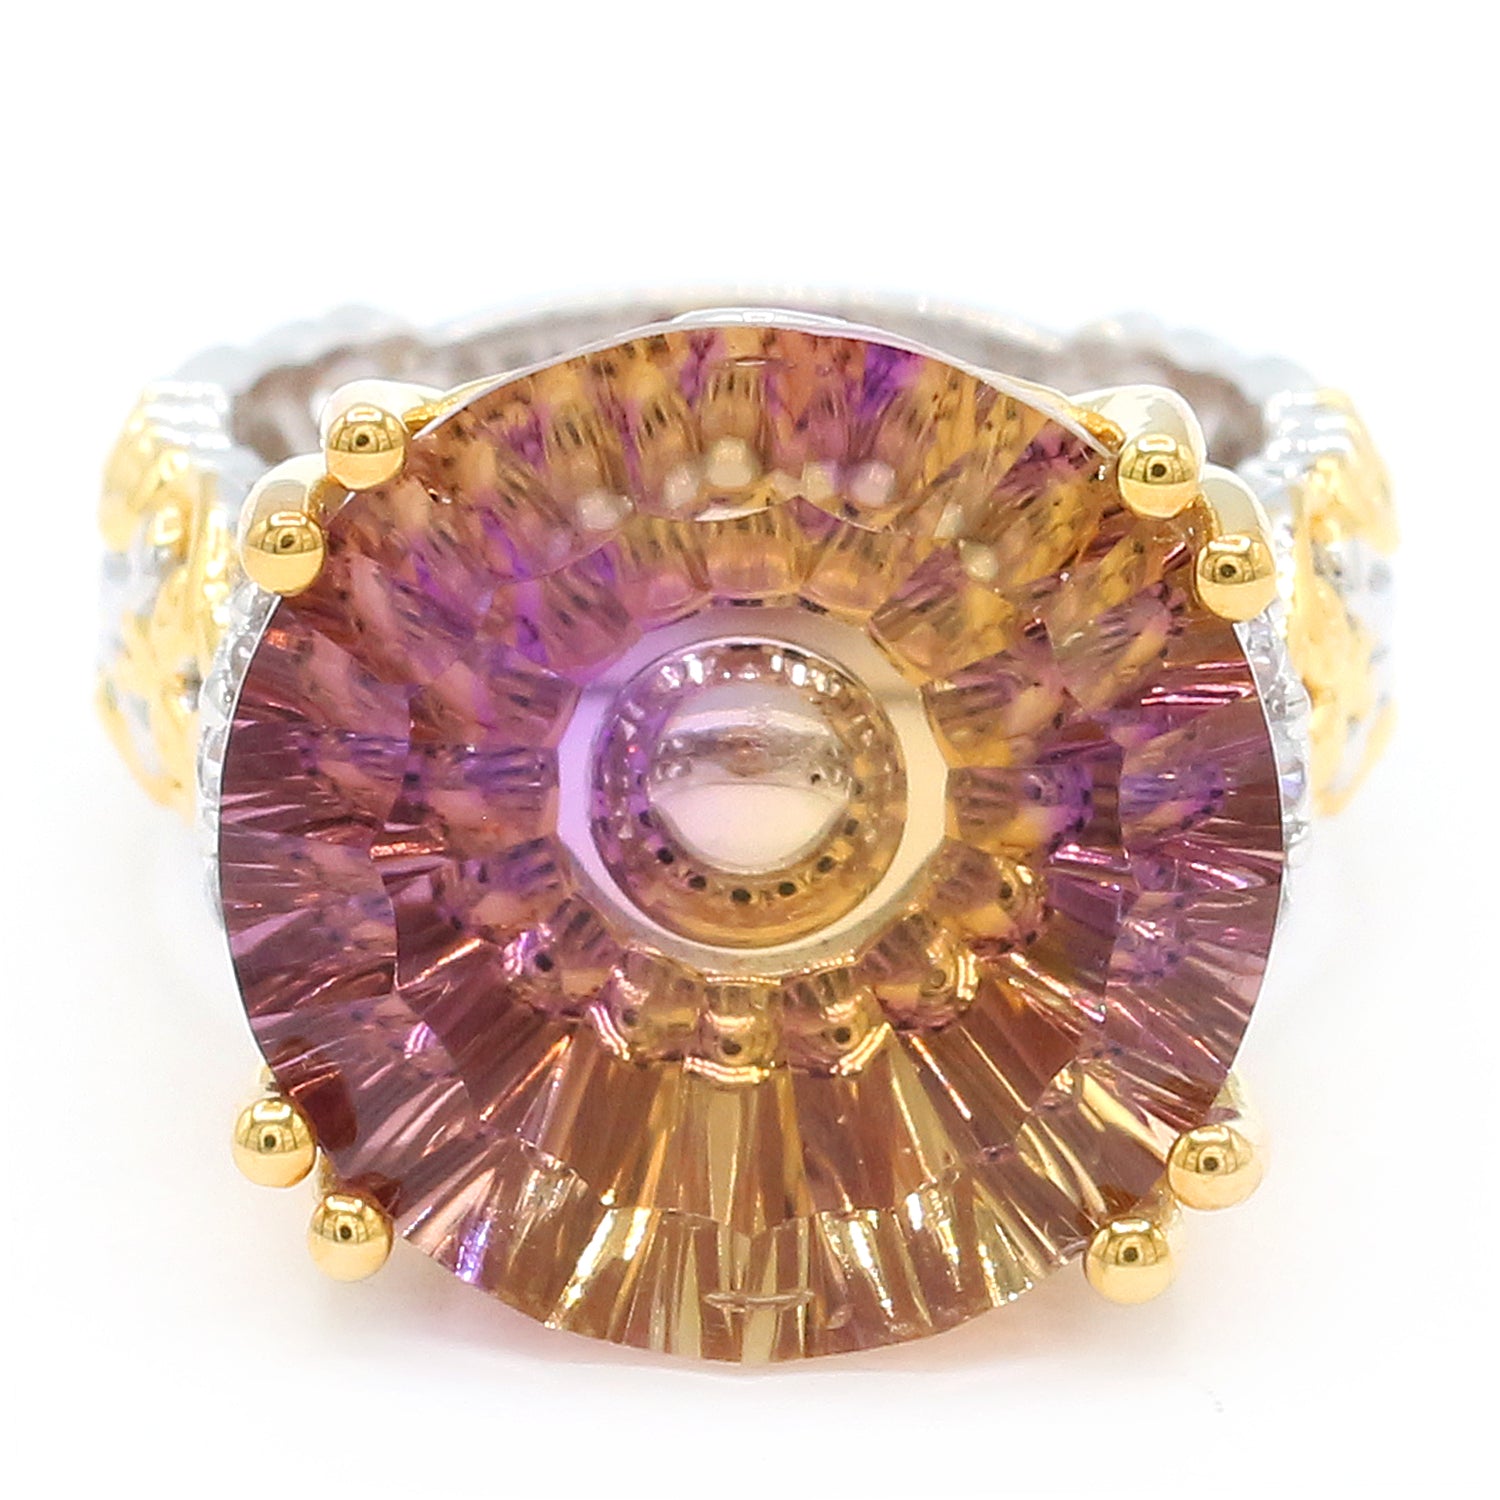 Limited Edition Gems en Vogue Luxe, One-of-a-Kind 20.00ctw Ametrine & White Zircon Honker Ring